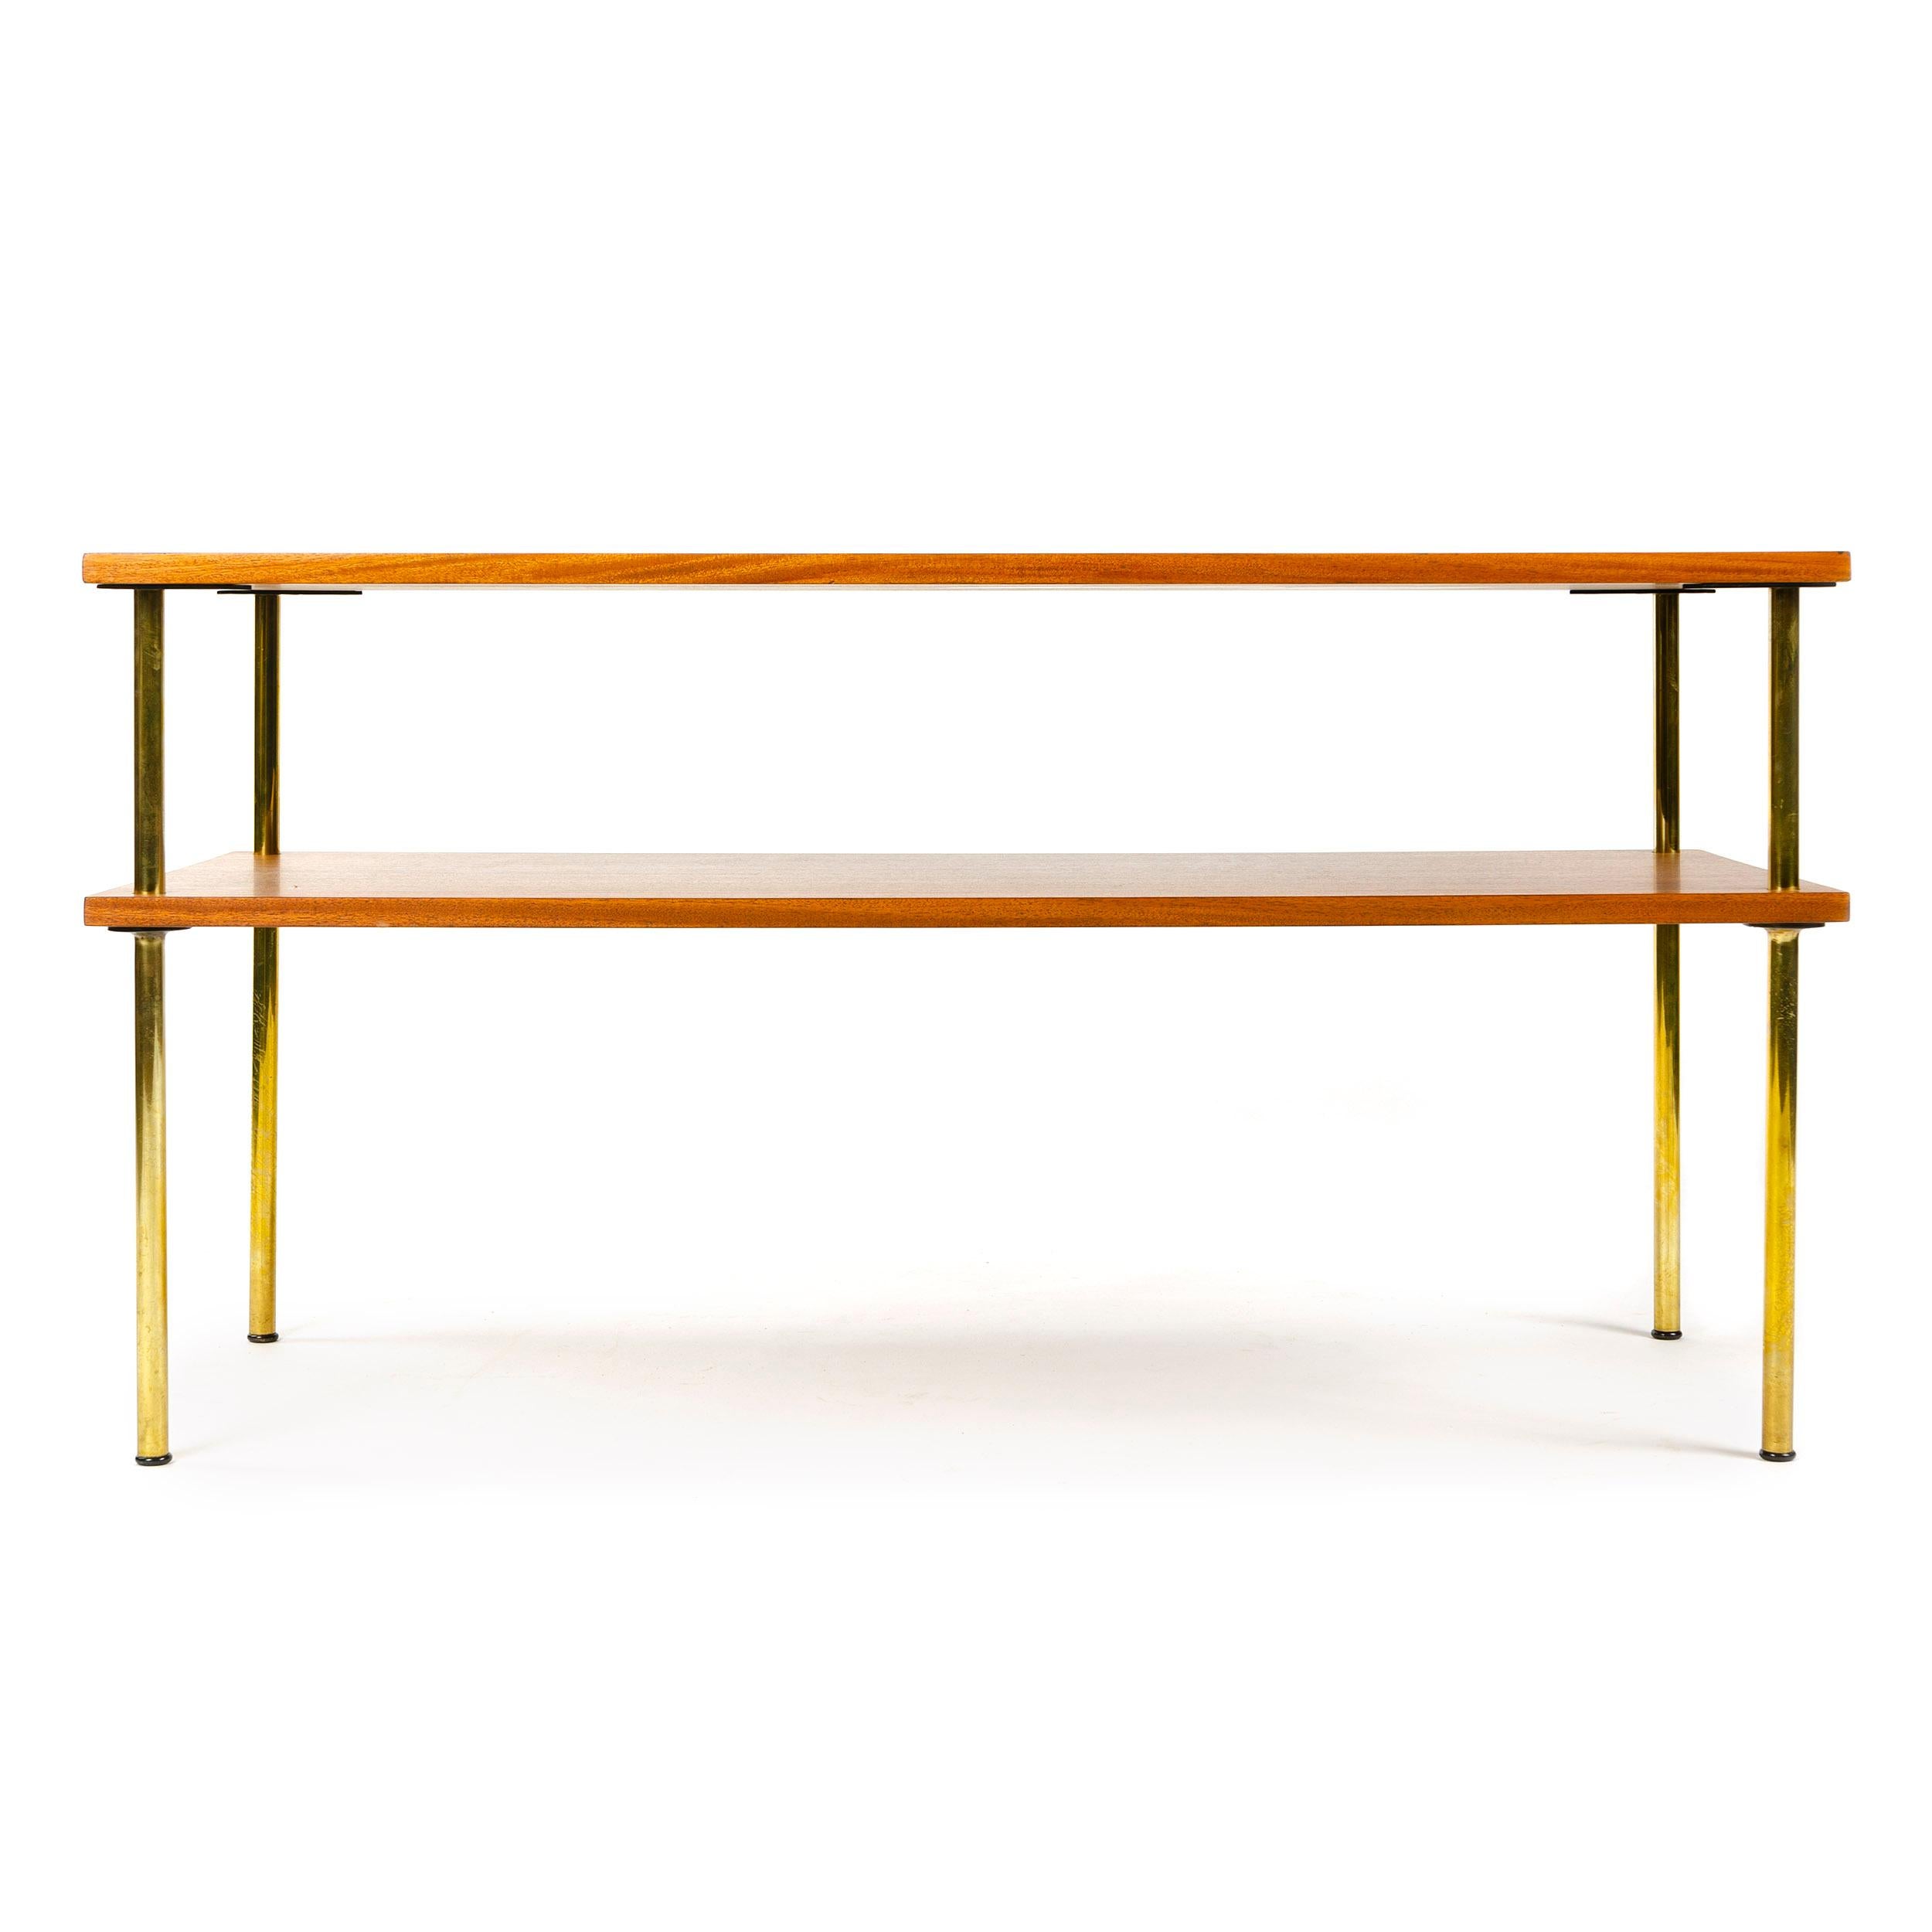 A Mid-Century Modern walnut console table / coffee table designed by Harvey Probber with a single shelf and brass through tenon legs. Made in the USA, circa 1960s.